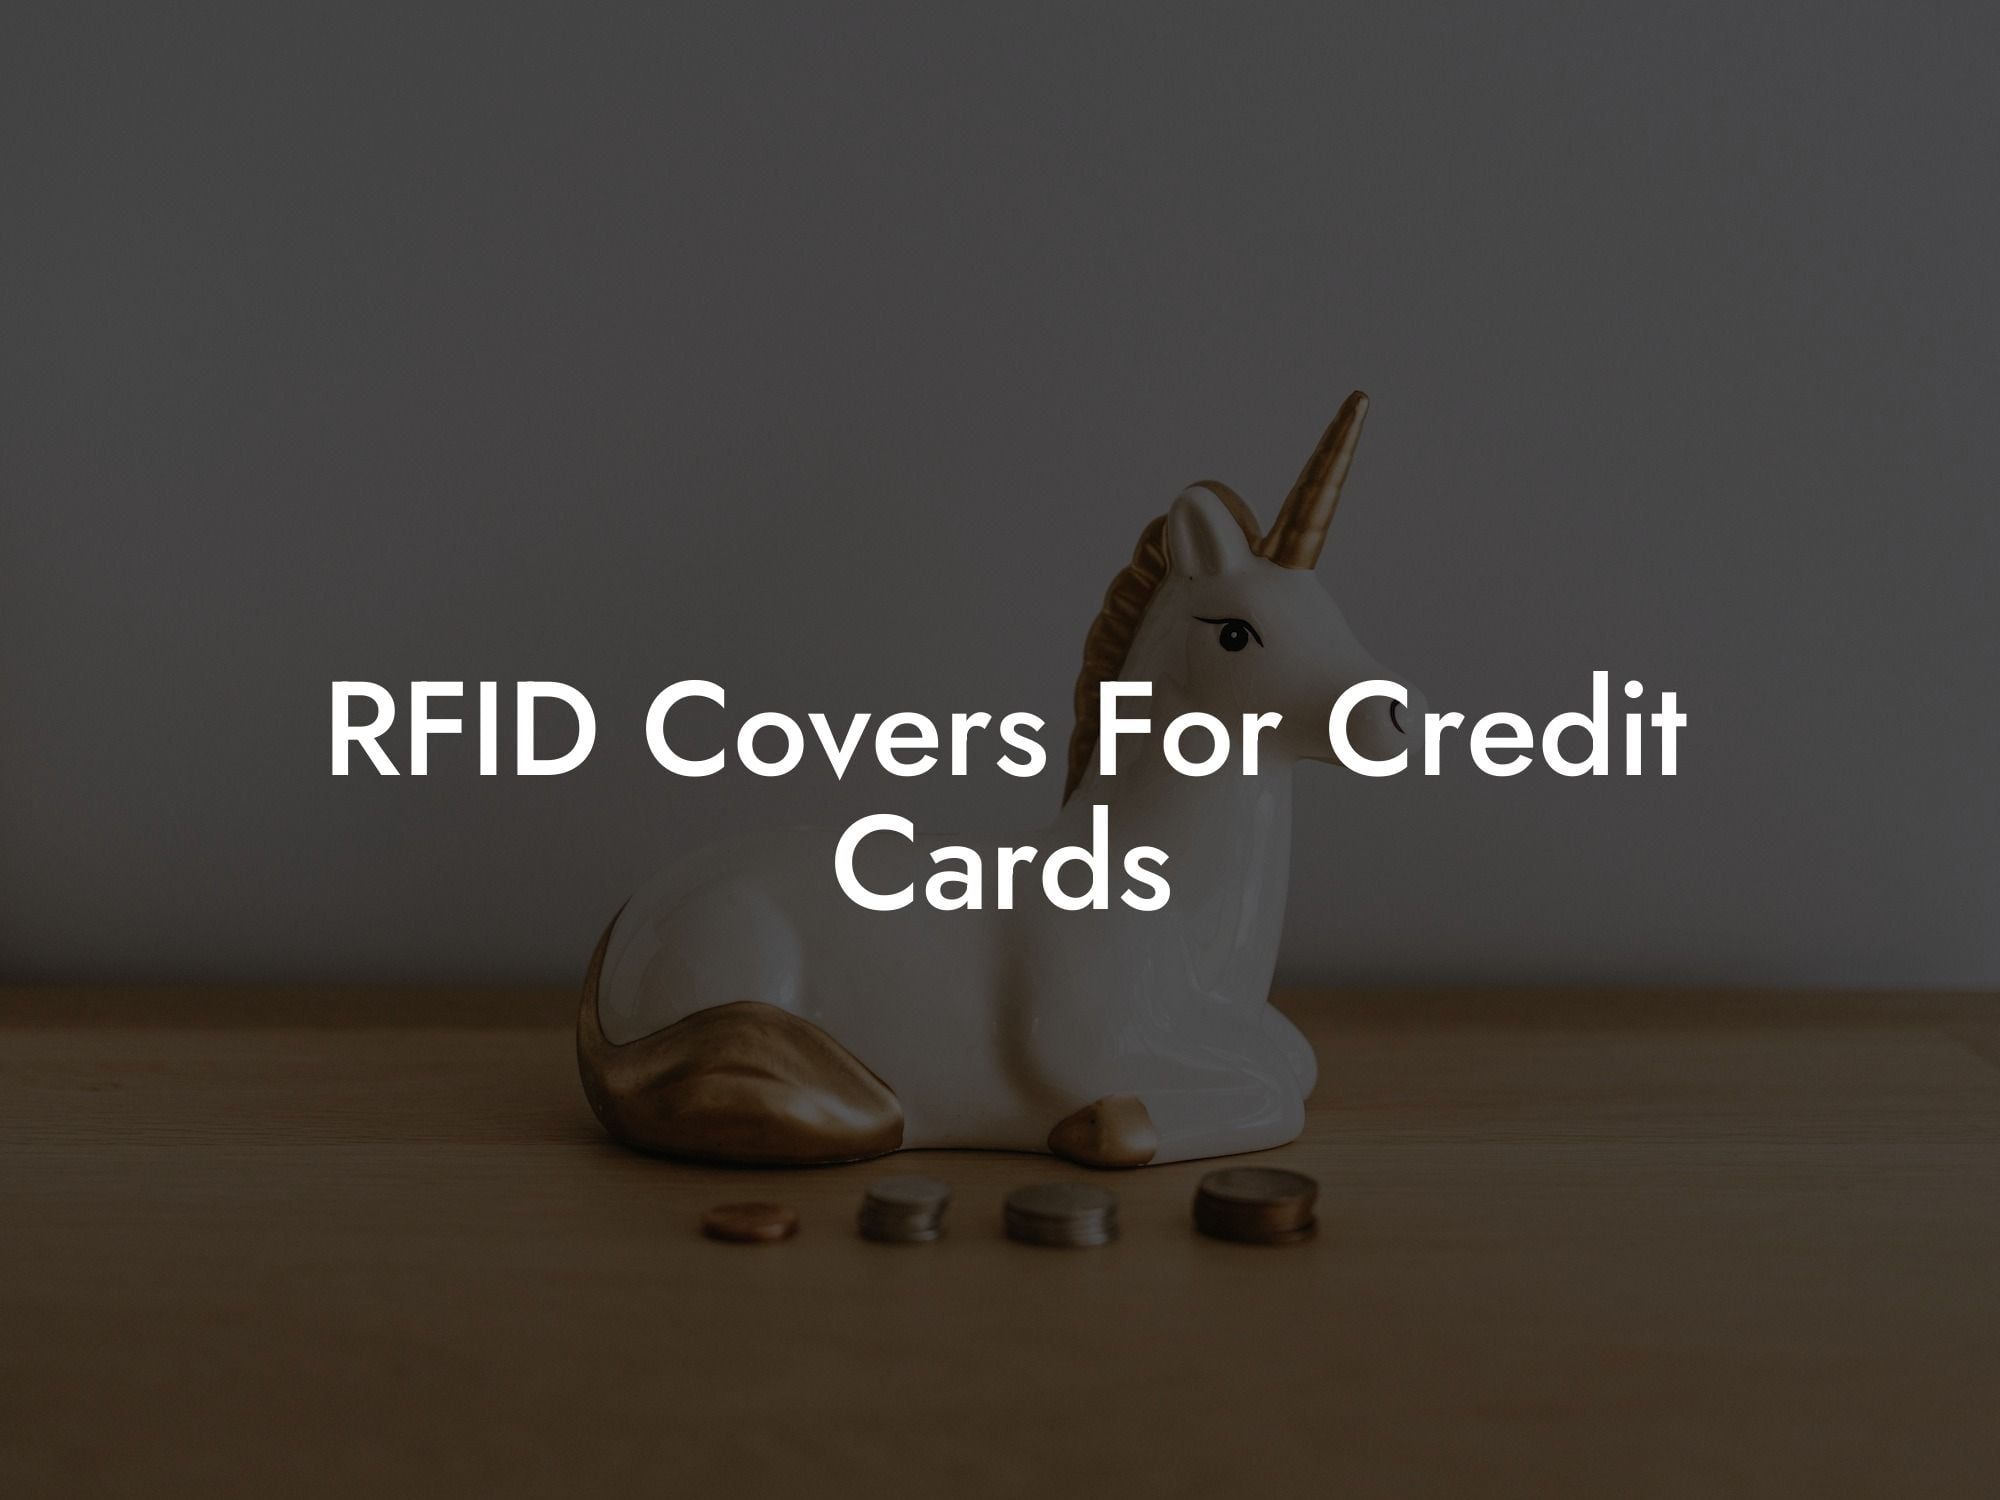 RFID Covers For Credit Cards